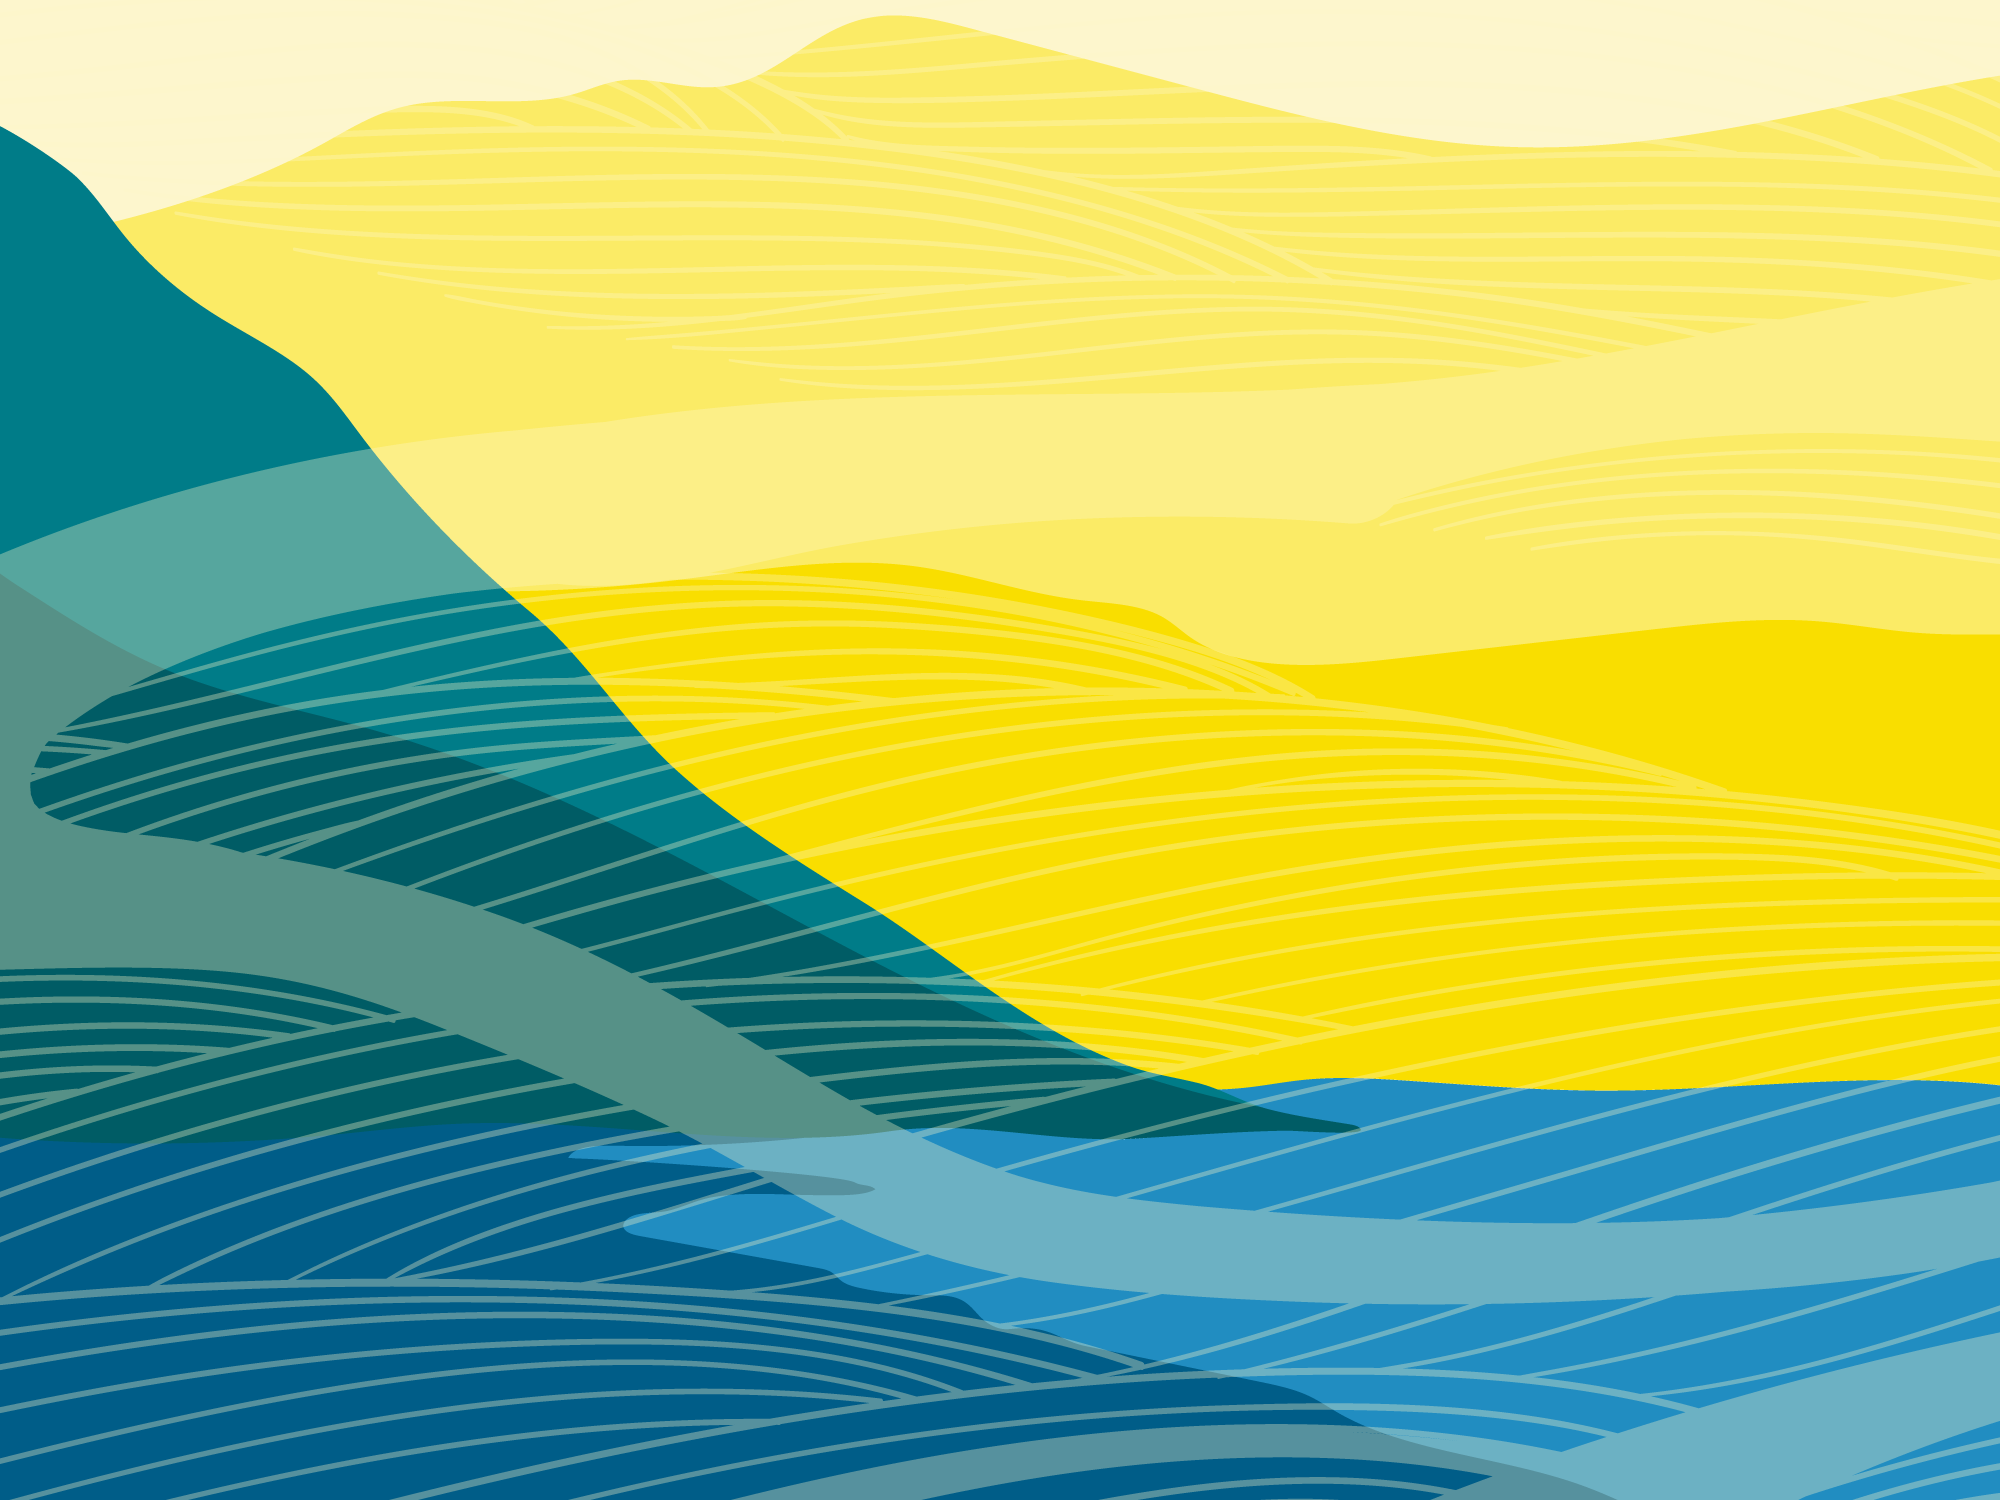 Abstract line illustration featuring green hills, yellow mountains, and blue water